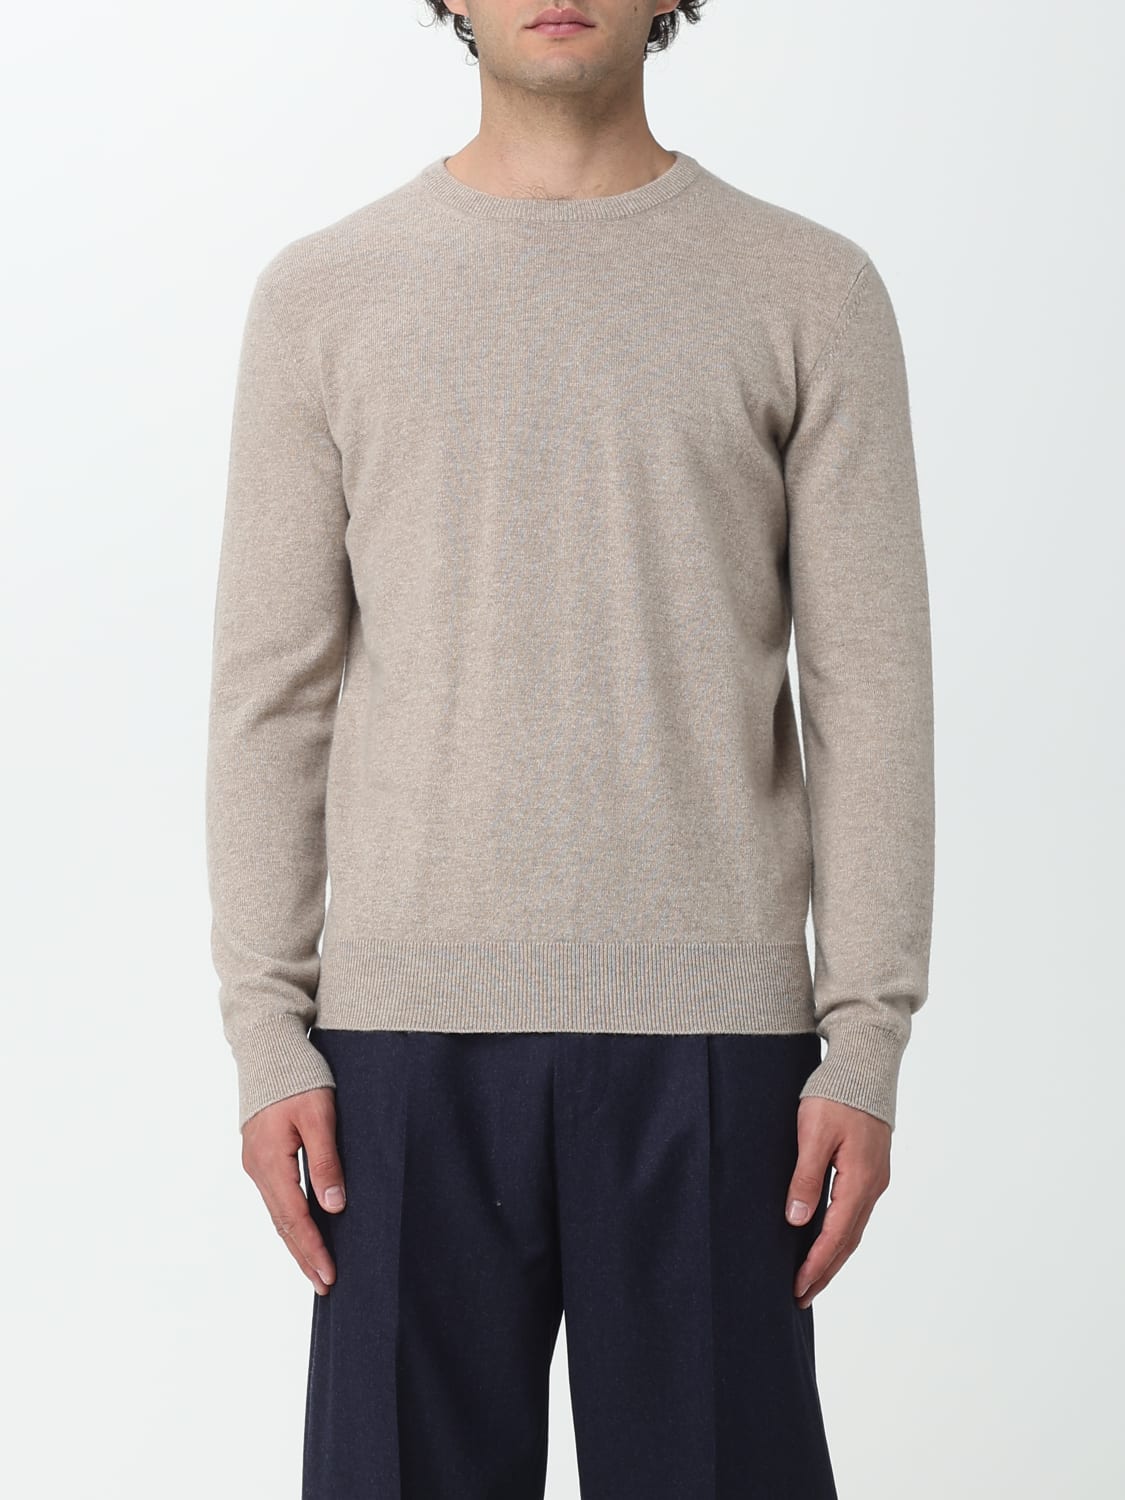 ZEGNA: sweater for man - Ivory | Zegna sweater 110UCK10A6 online at ...